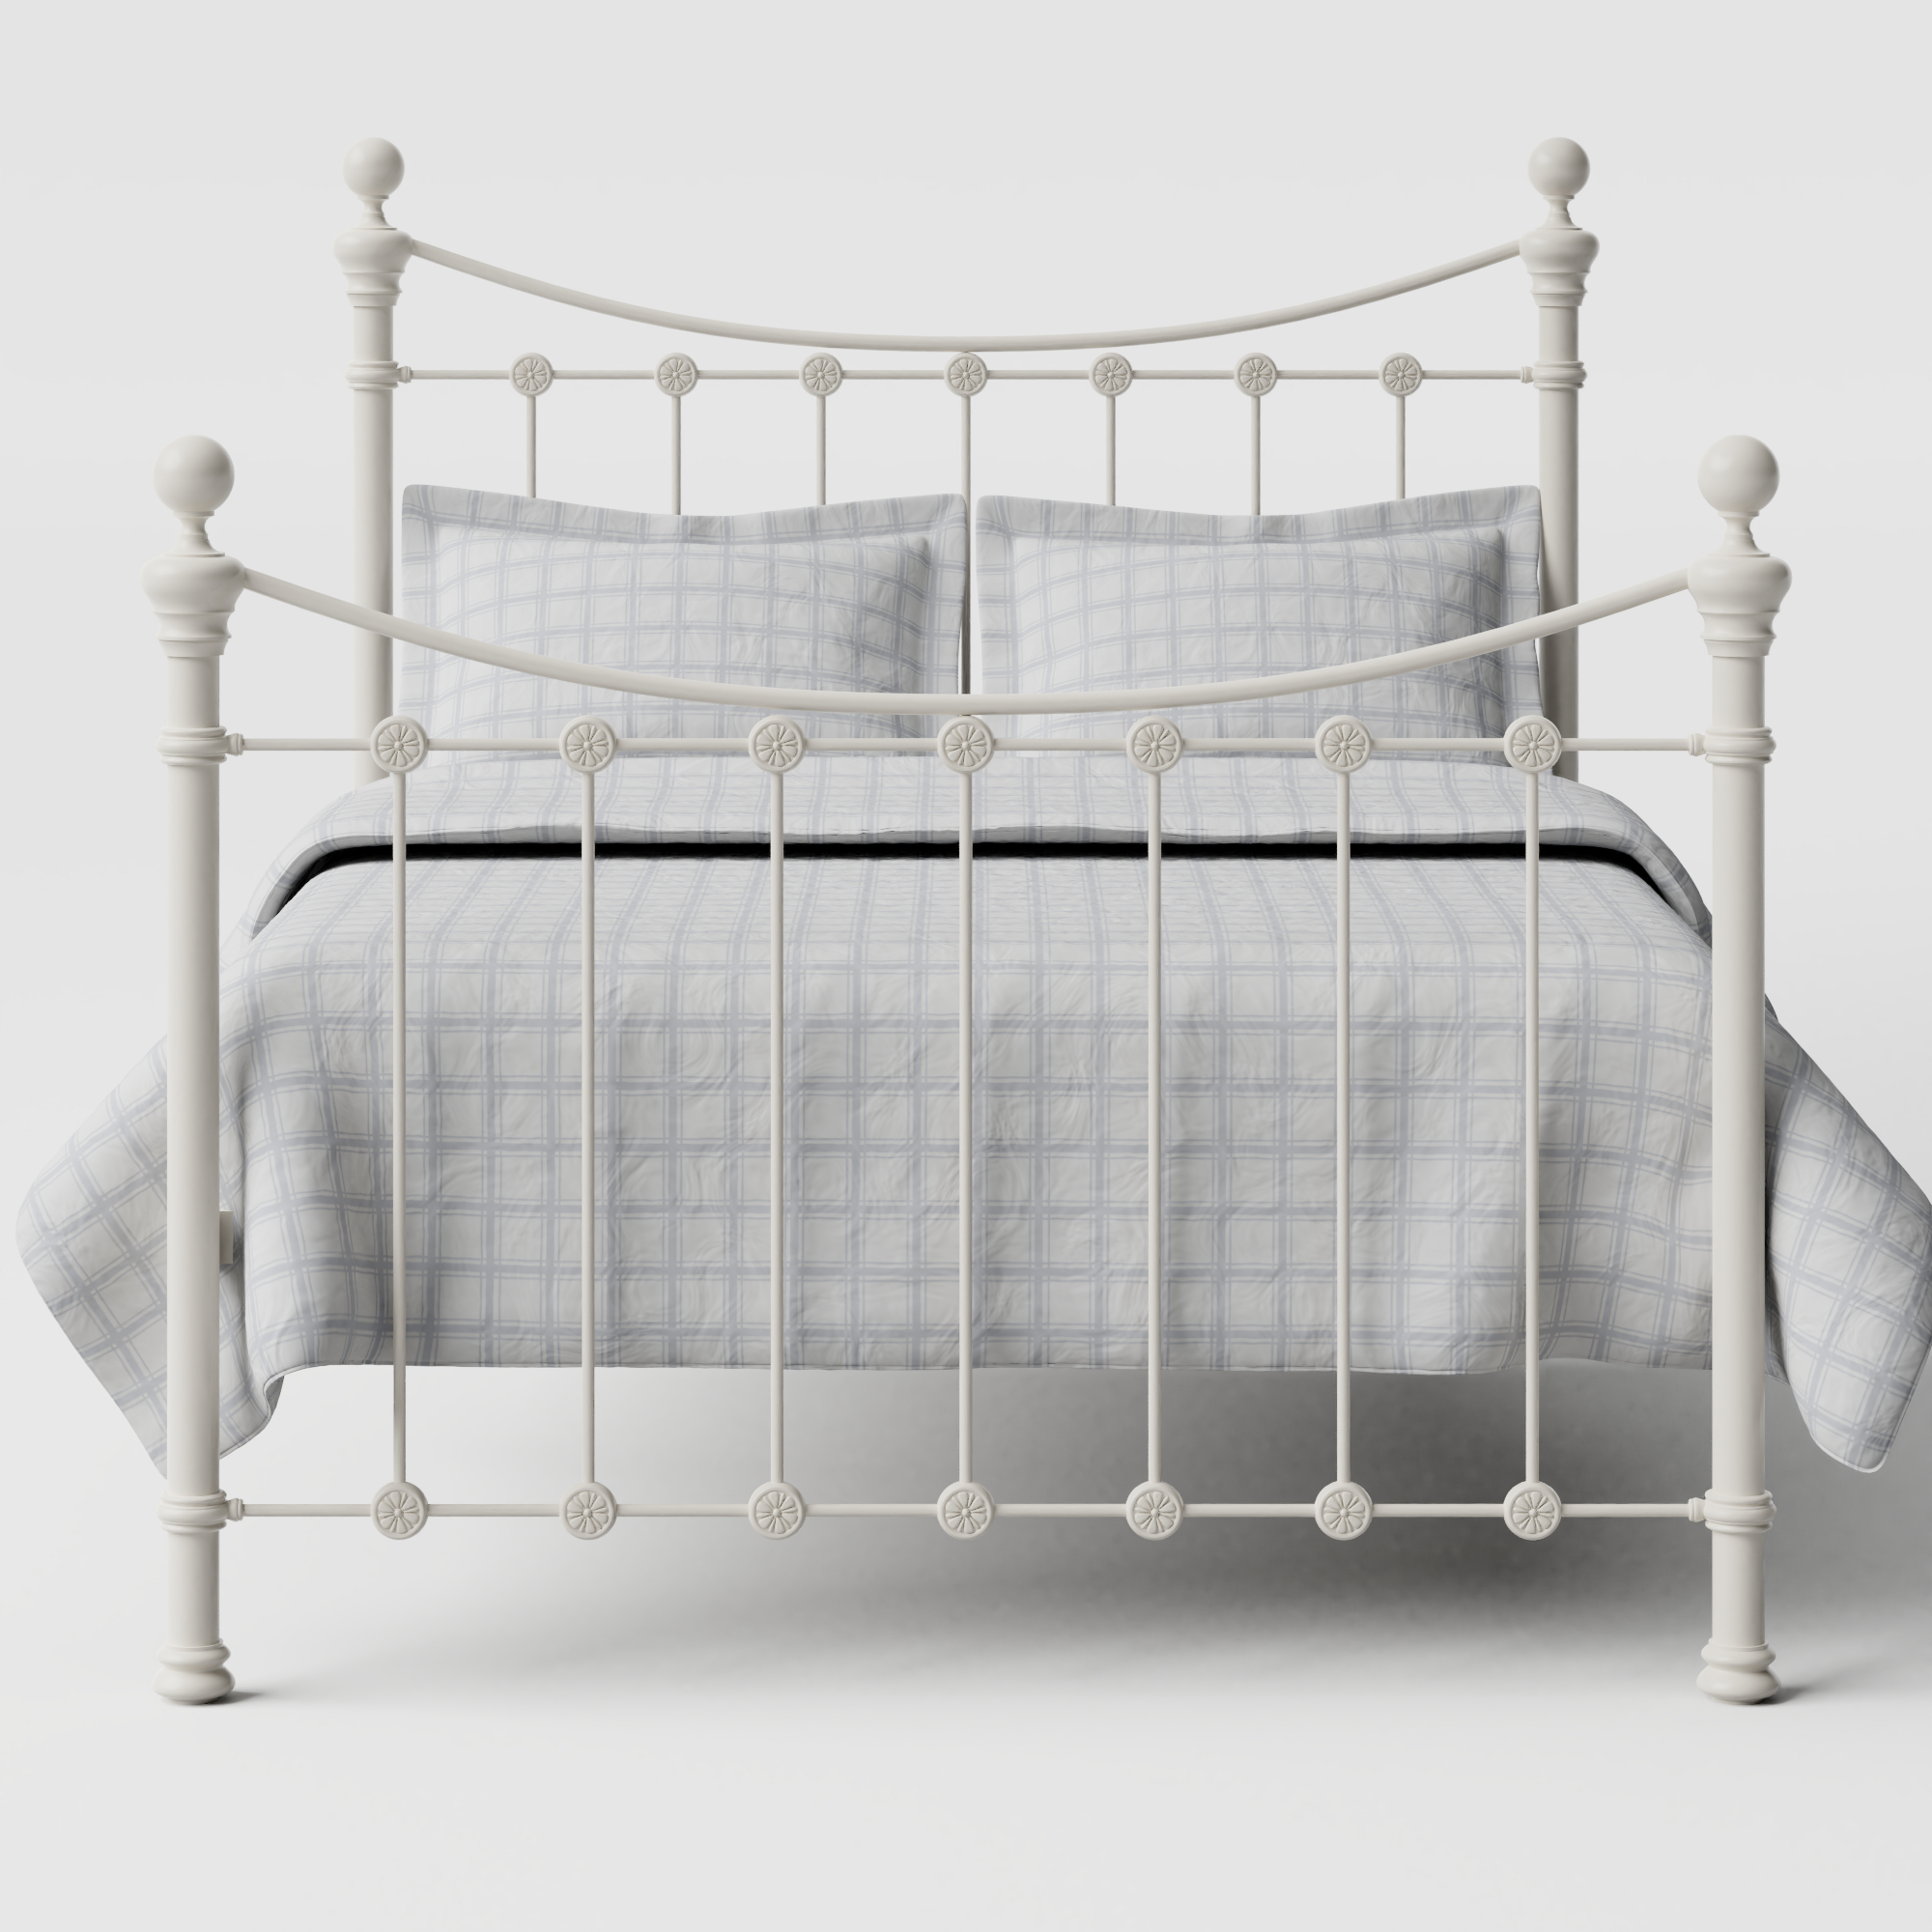 Selkirk Solo iron/metal bed in ivory